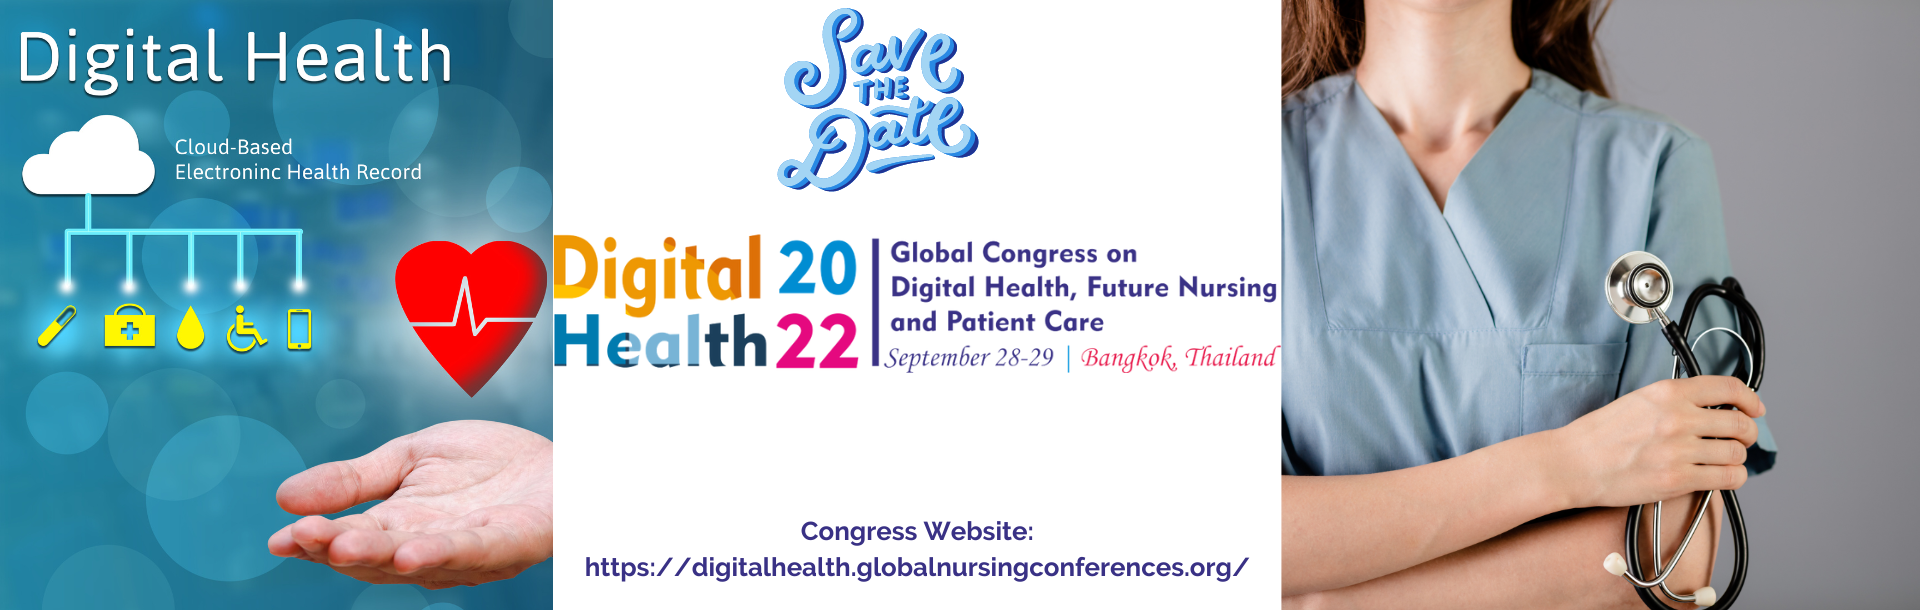 Global Congress on Digital Health, Future Nursing and Patient Care